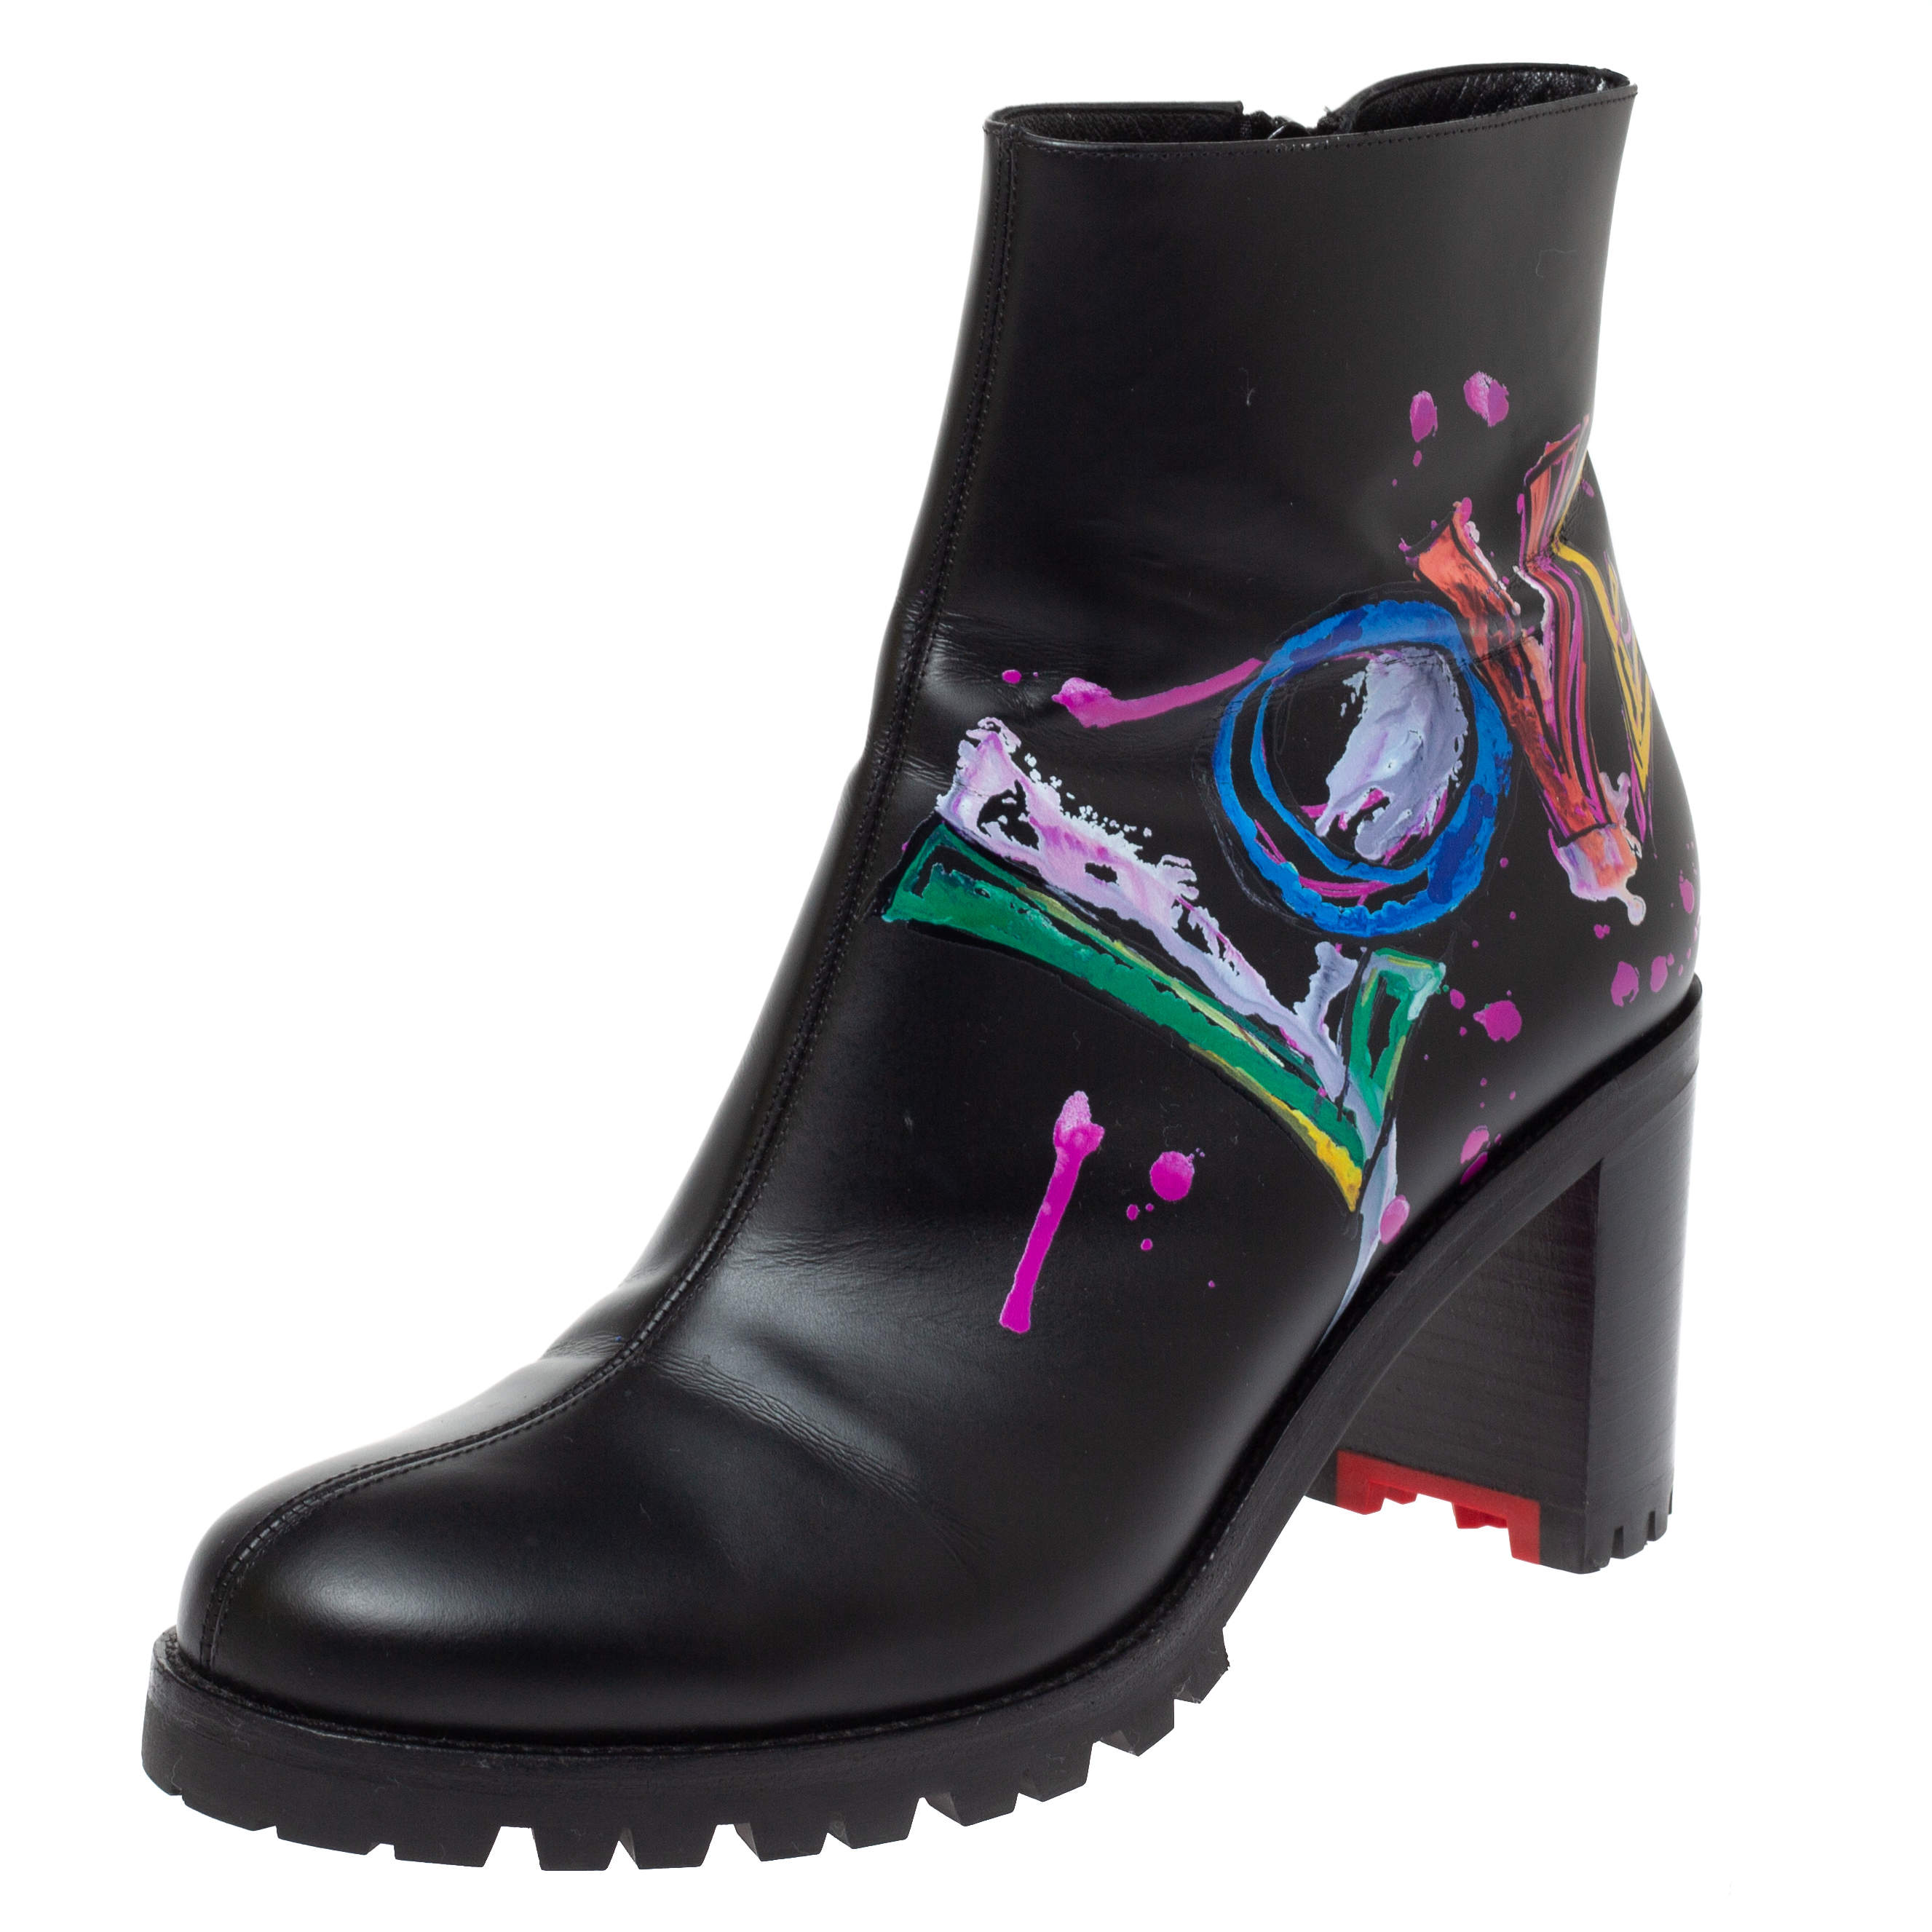 Christian Louboutin Black Love Print Leather Ankle Boots Size 39.5